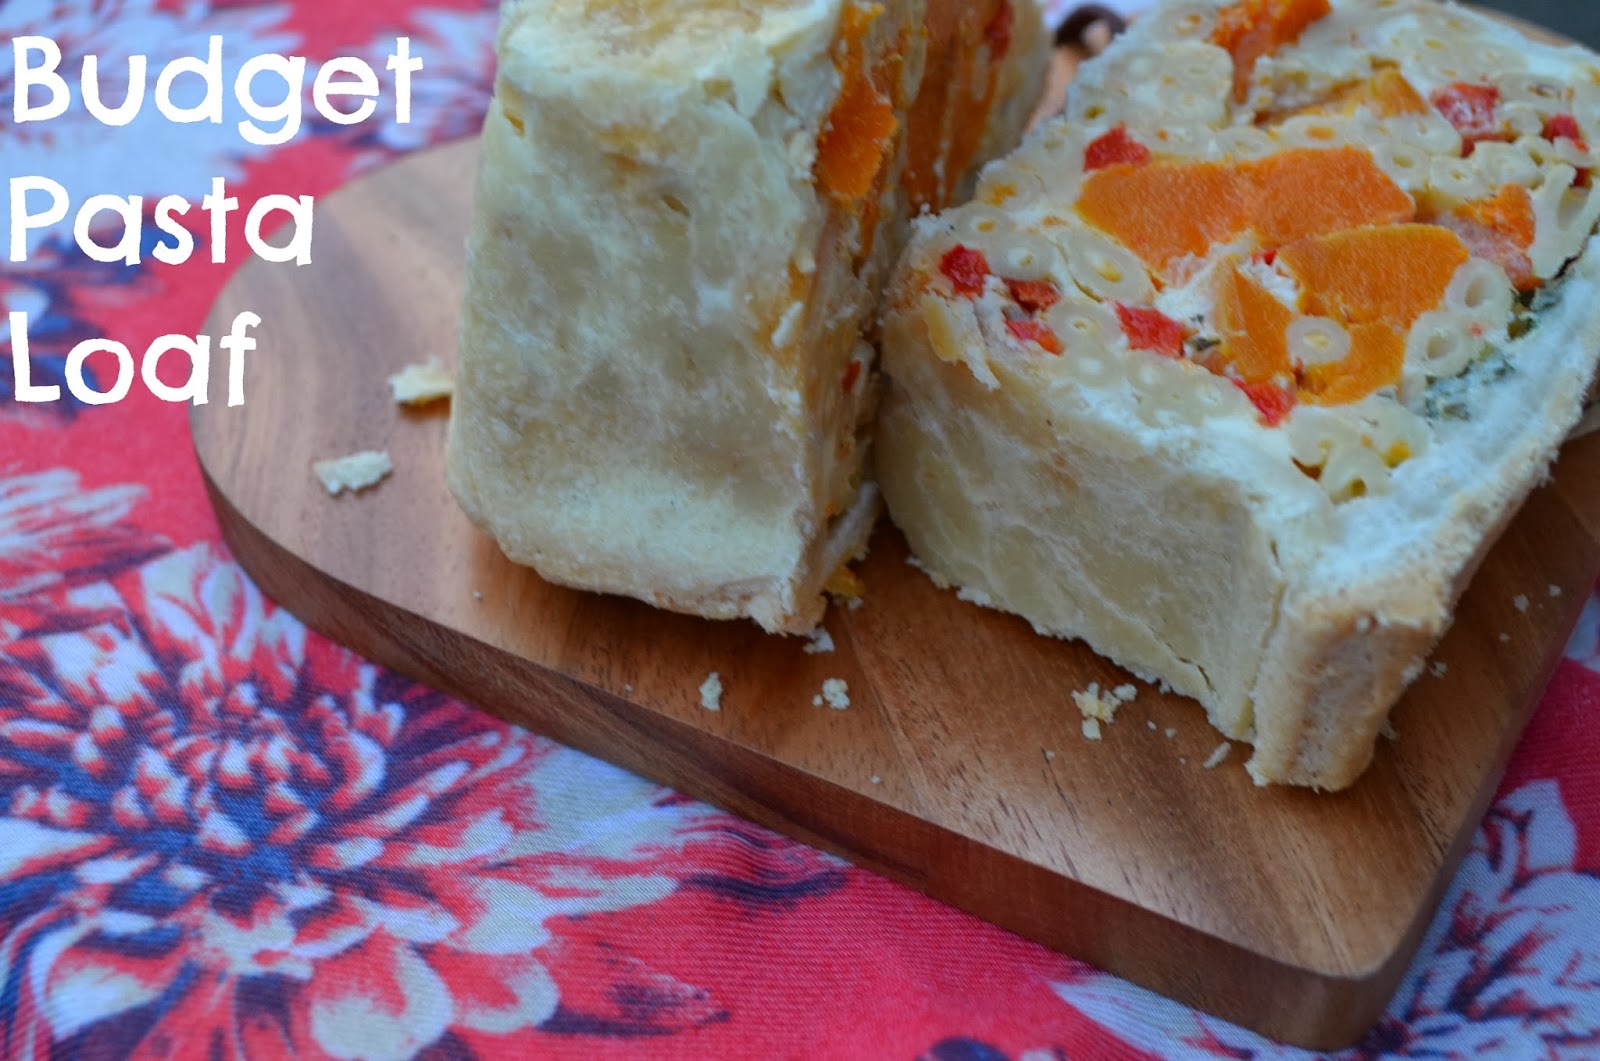 pasta loaf, budget recipe, pasta and pastry, cbias, social fabric